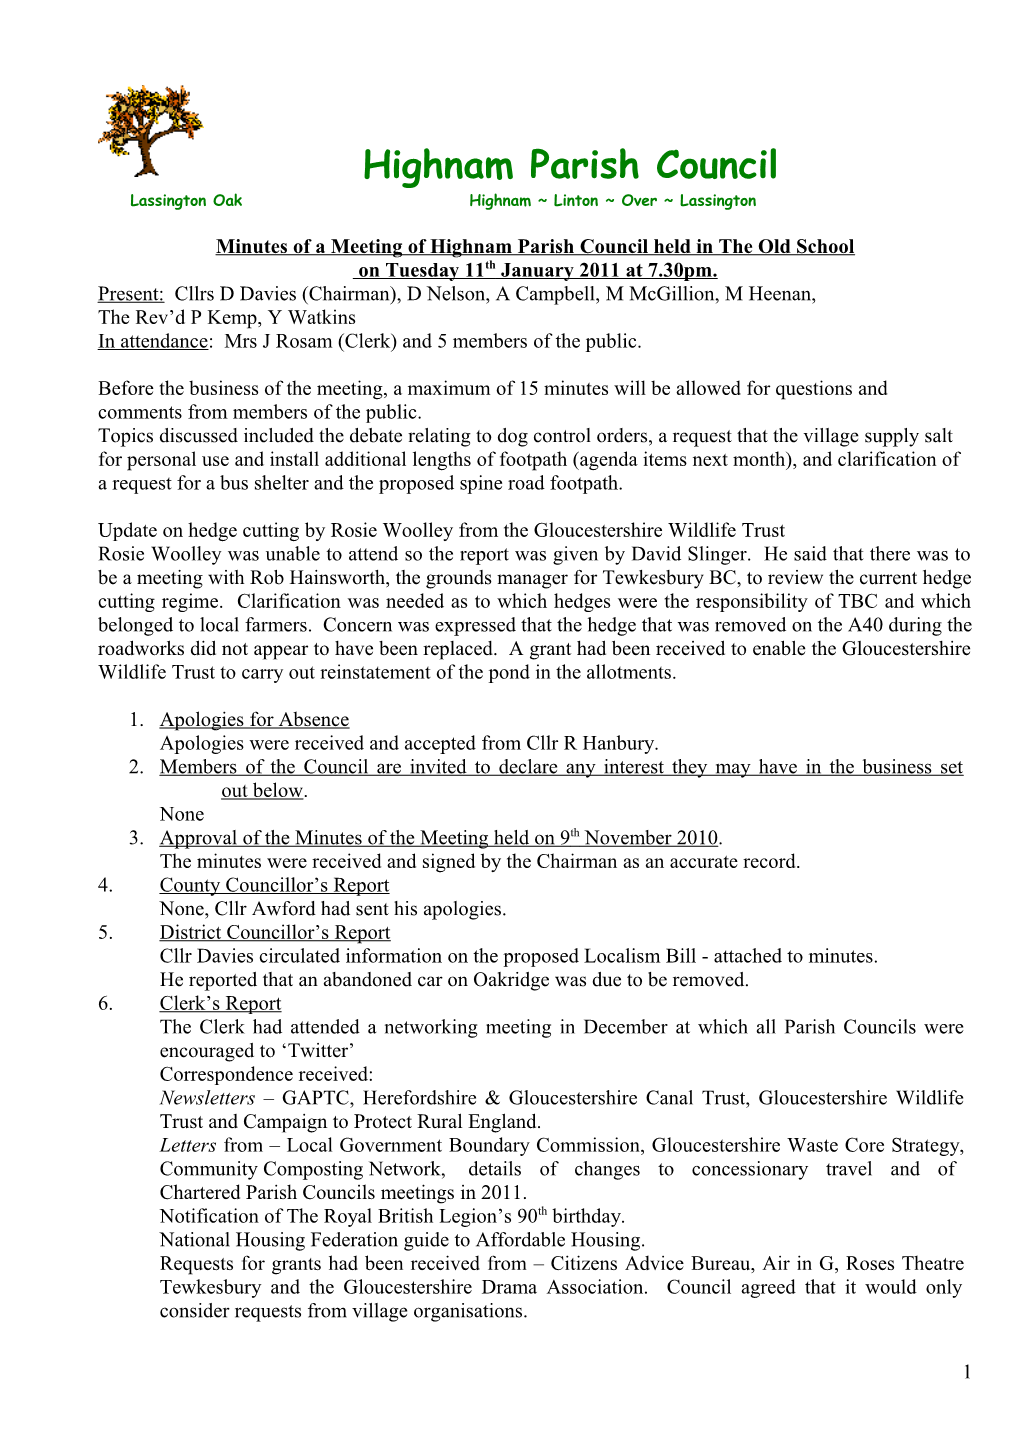 Minutes of a Meeting of Highnam Parish Council Held in the Old School